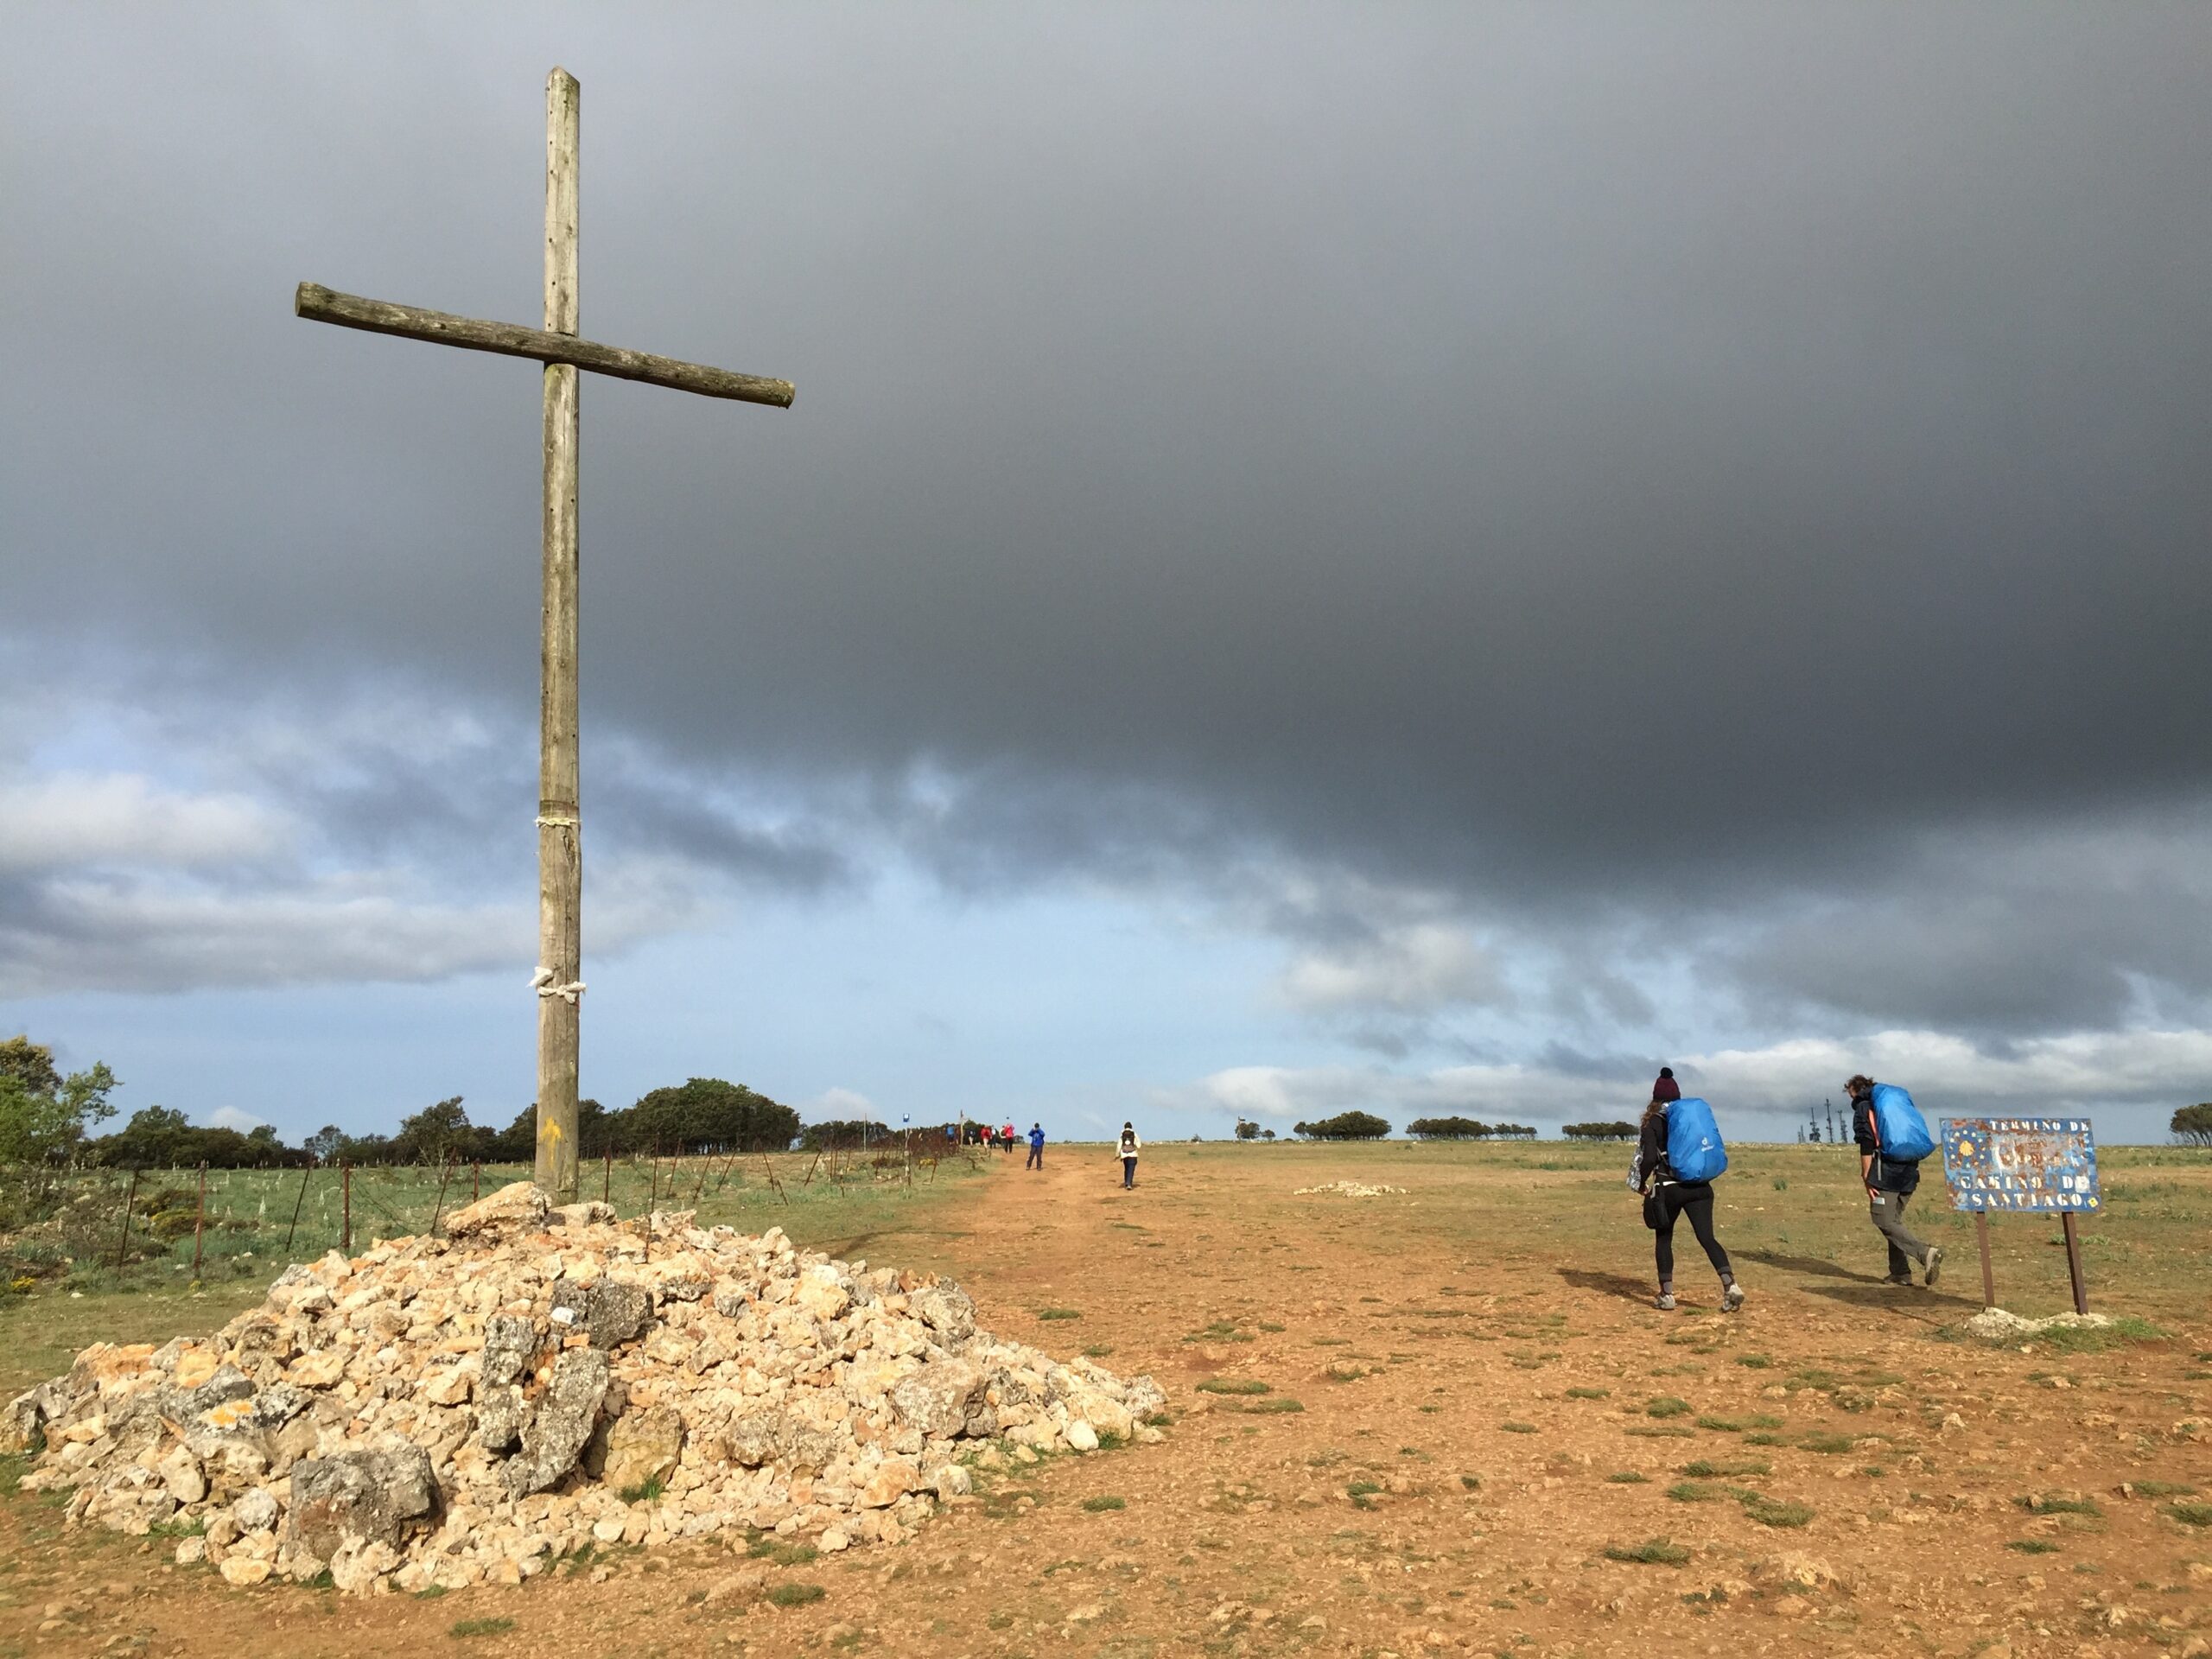 Hikers walk past a wooden cross above Atapuerca, Spain.